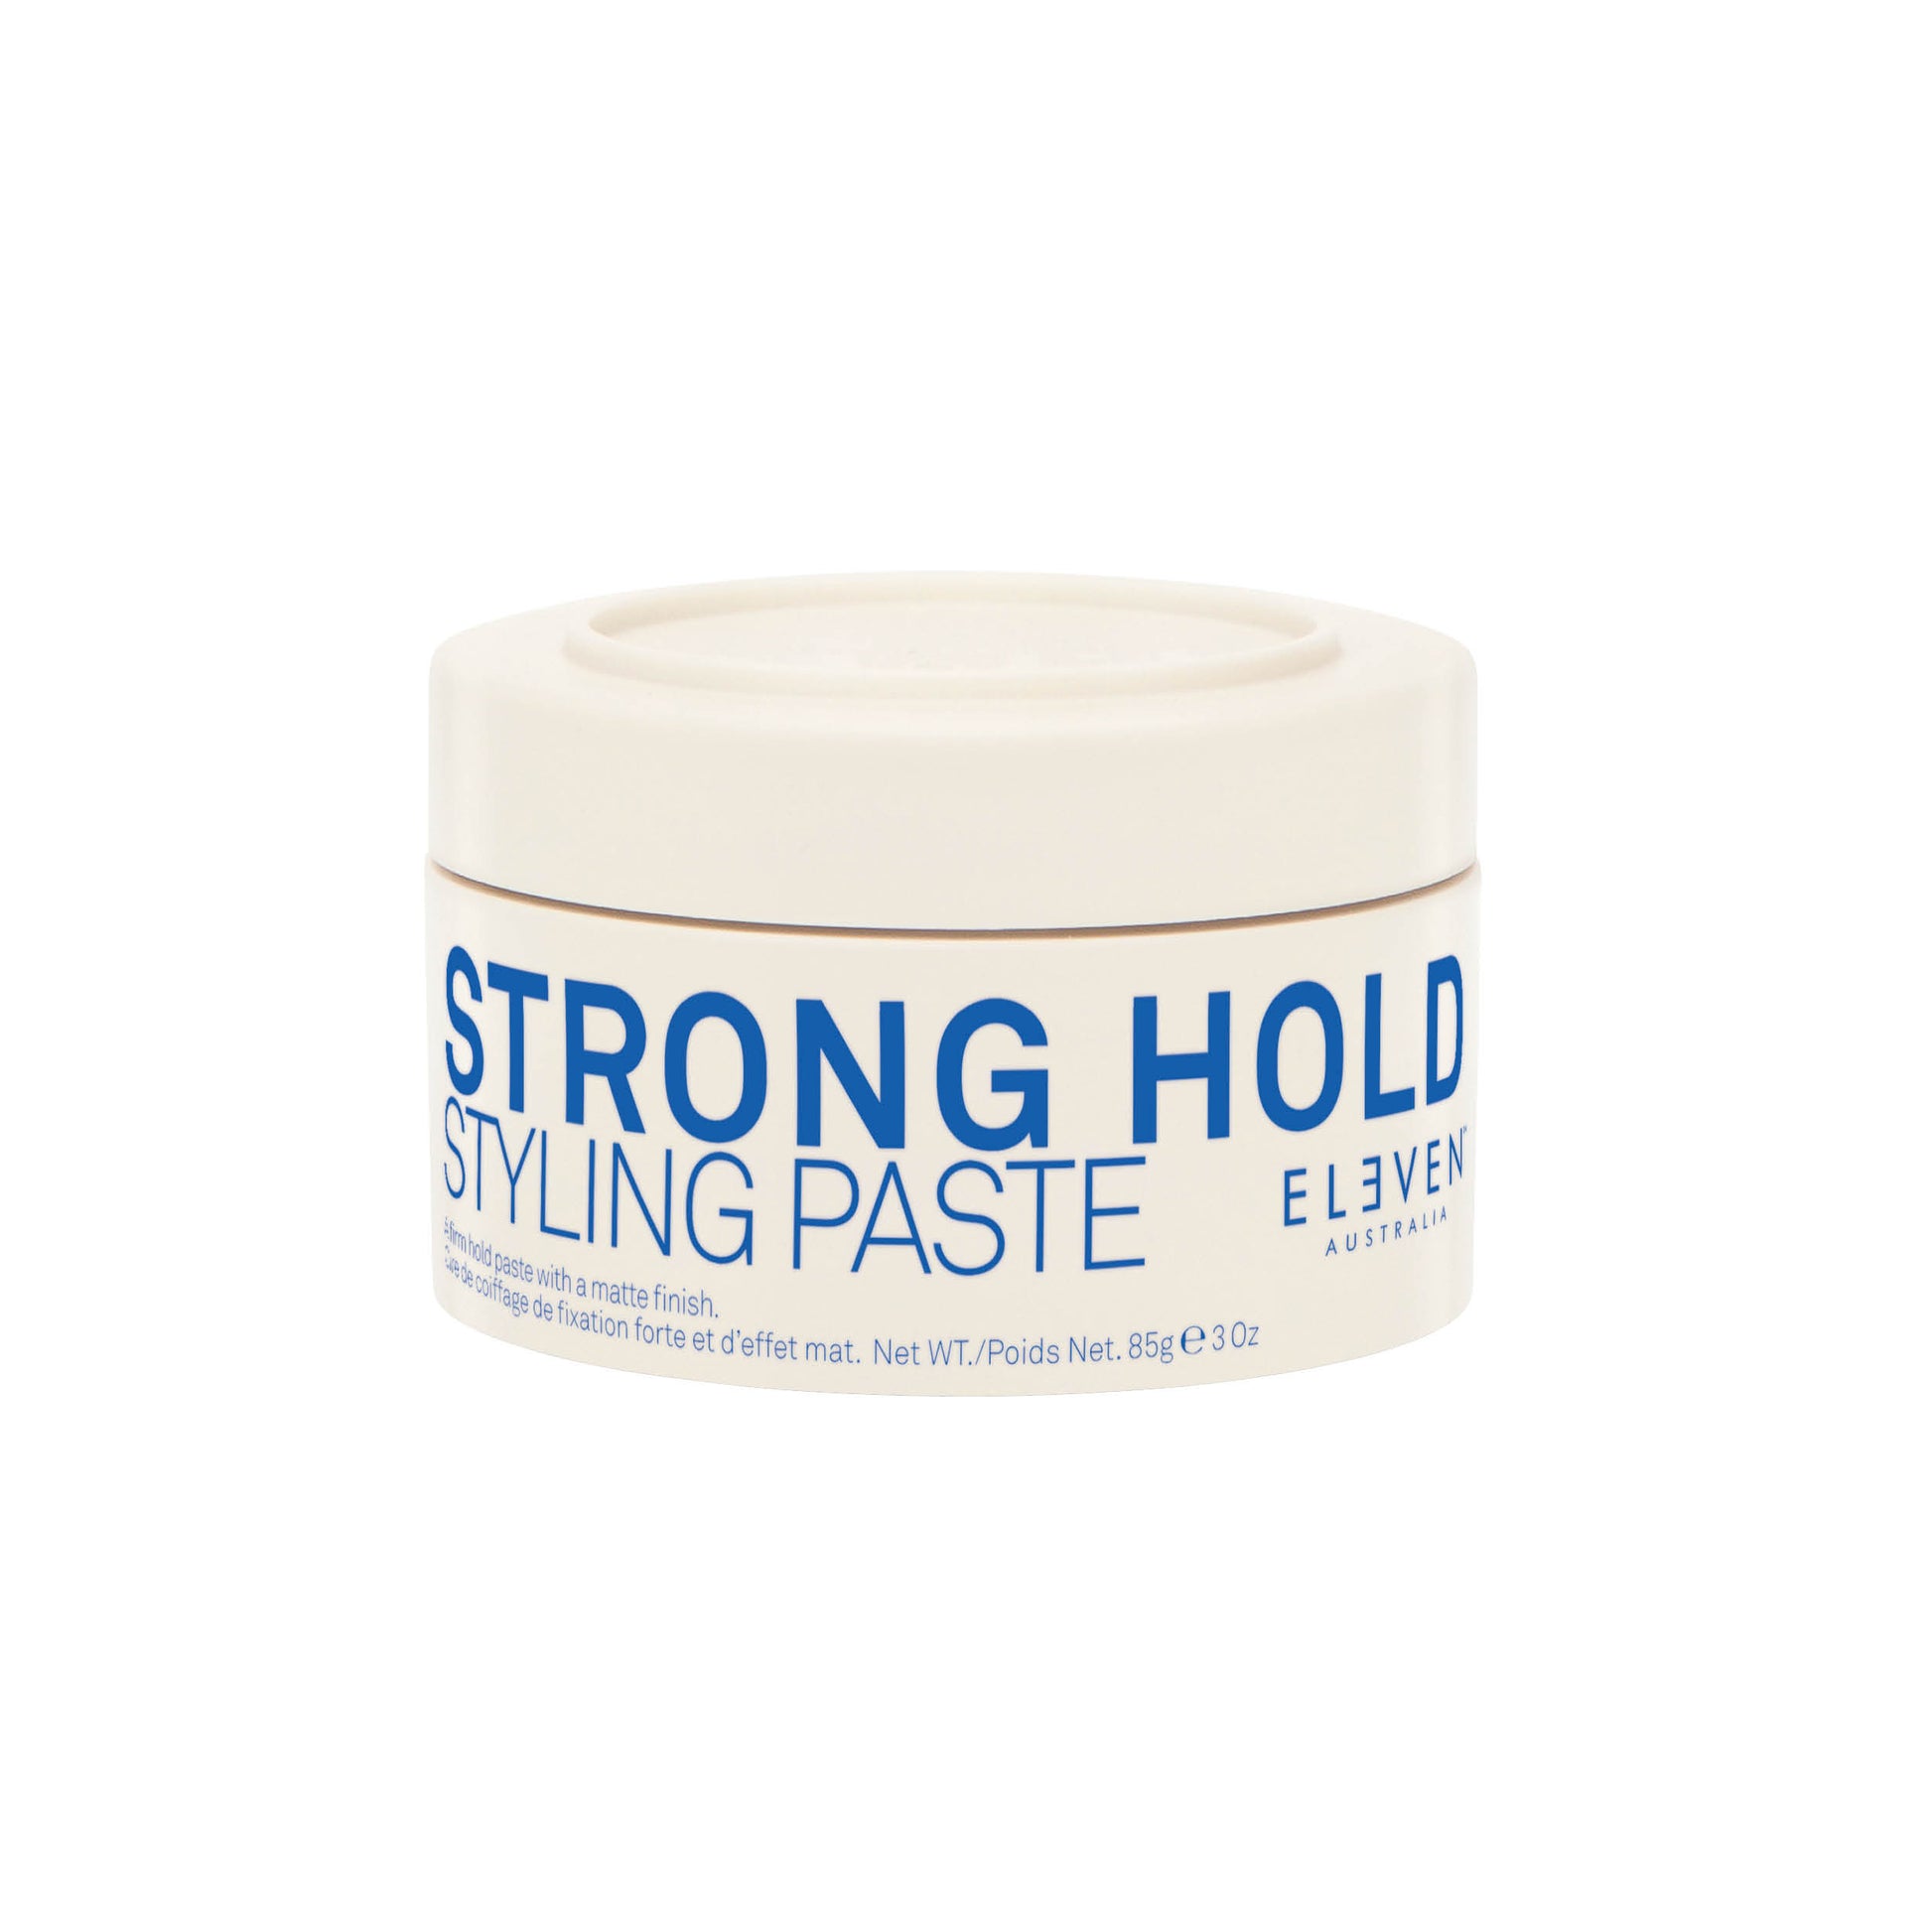 Eleven Strong Hold Styling Paste.